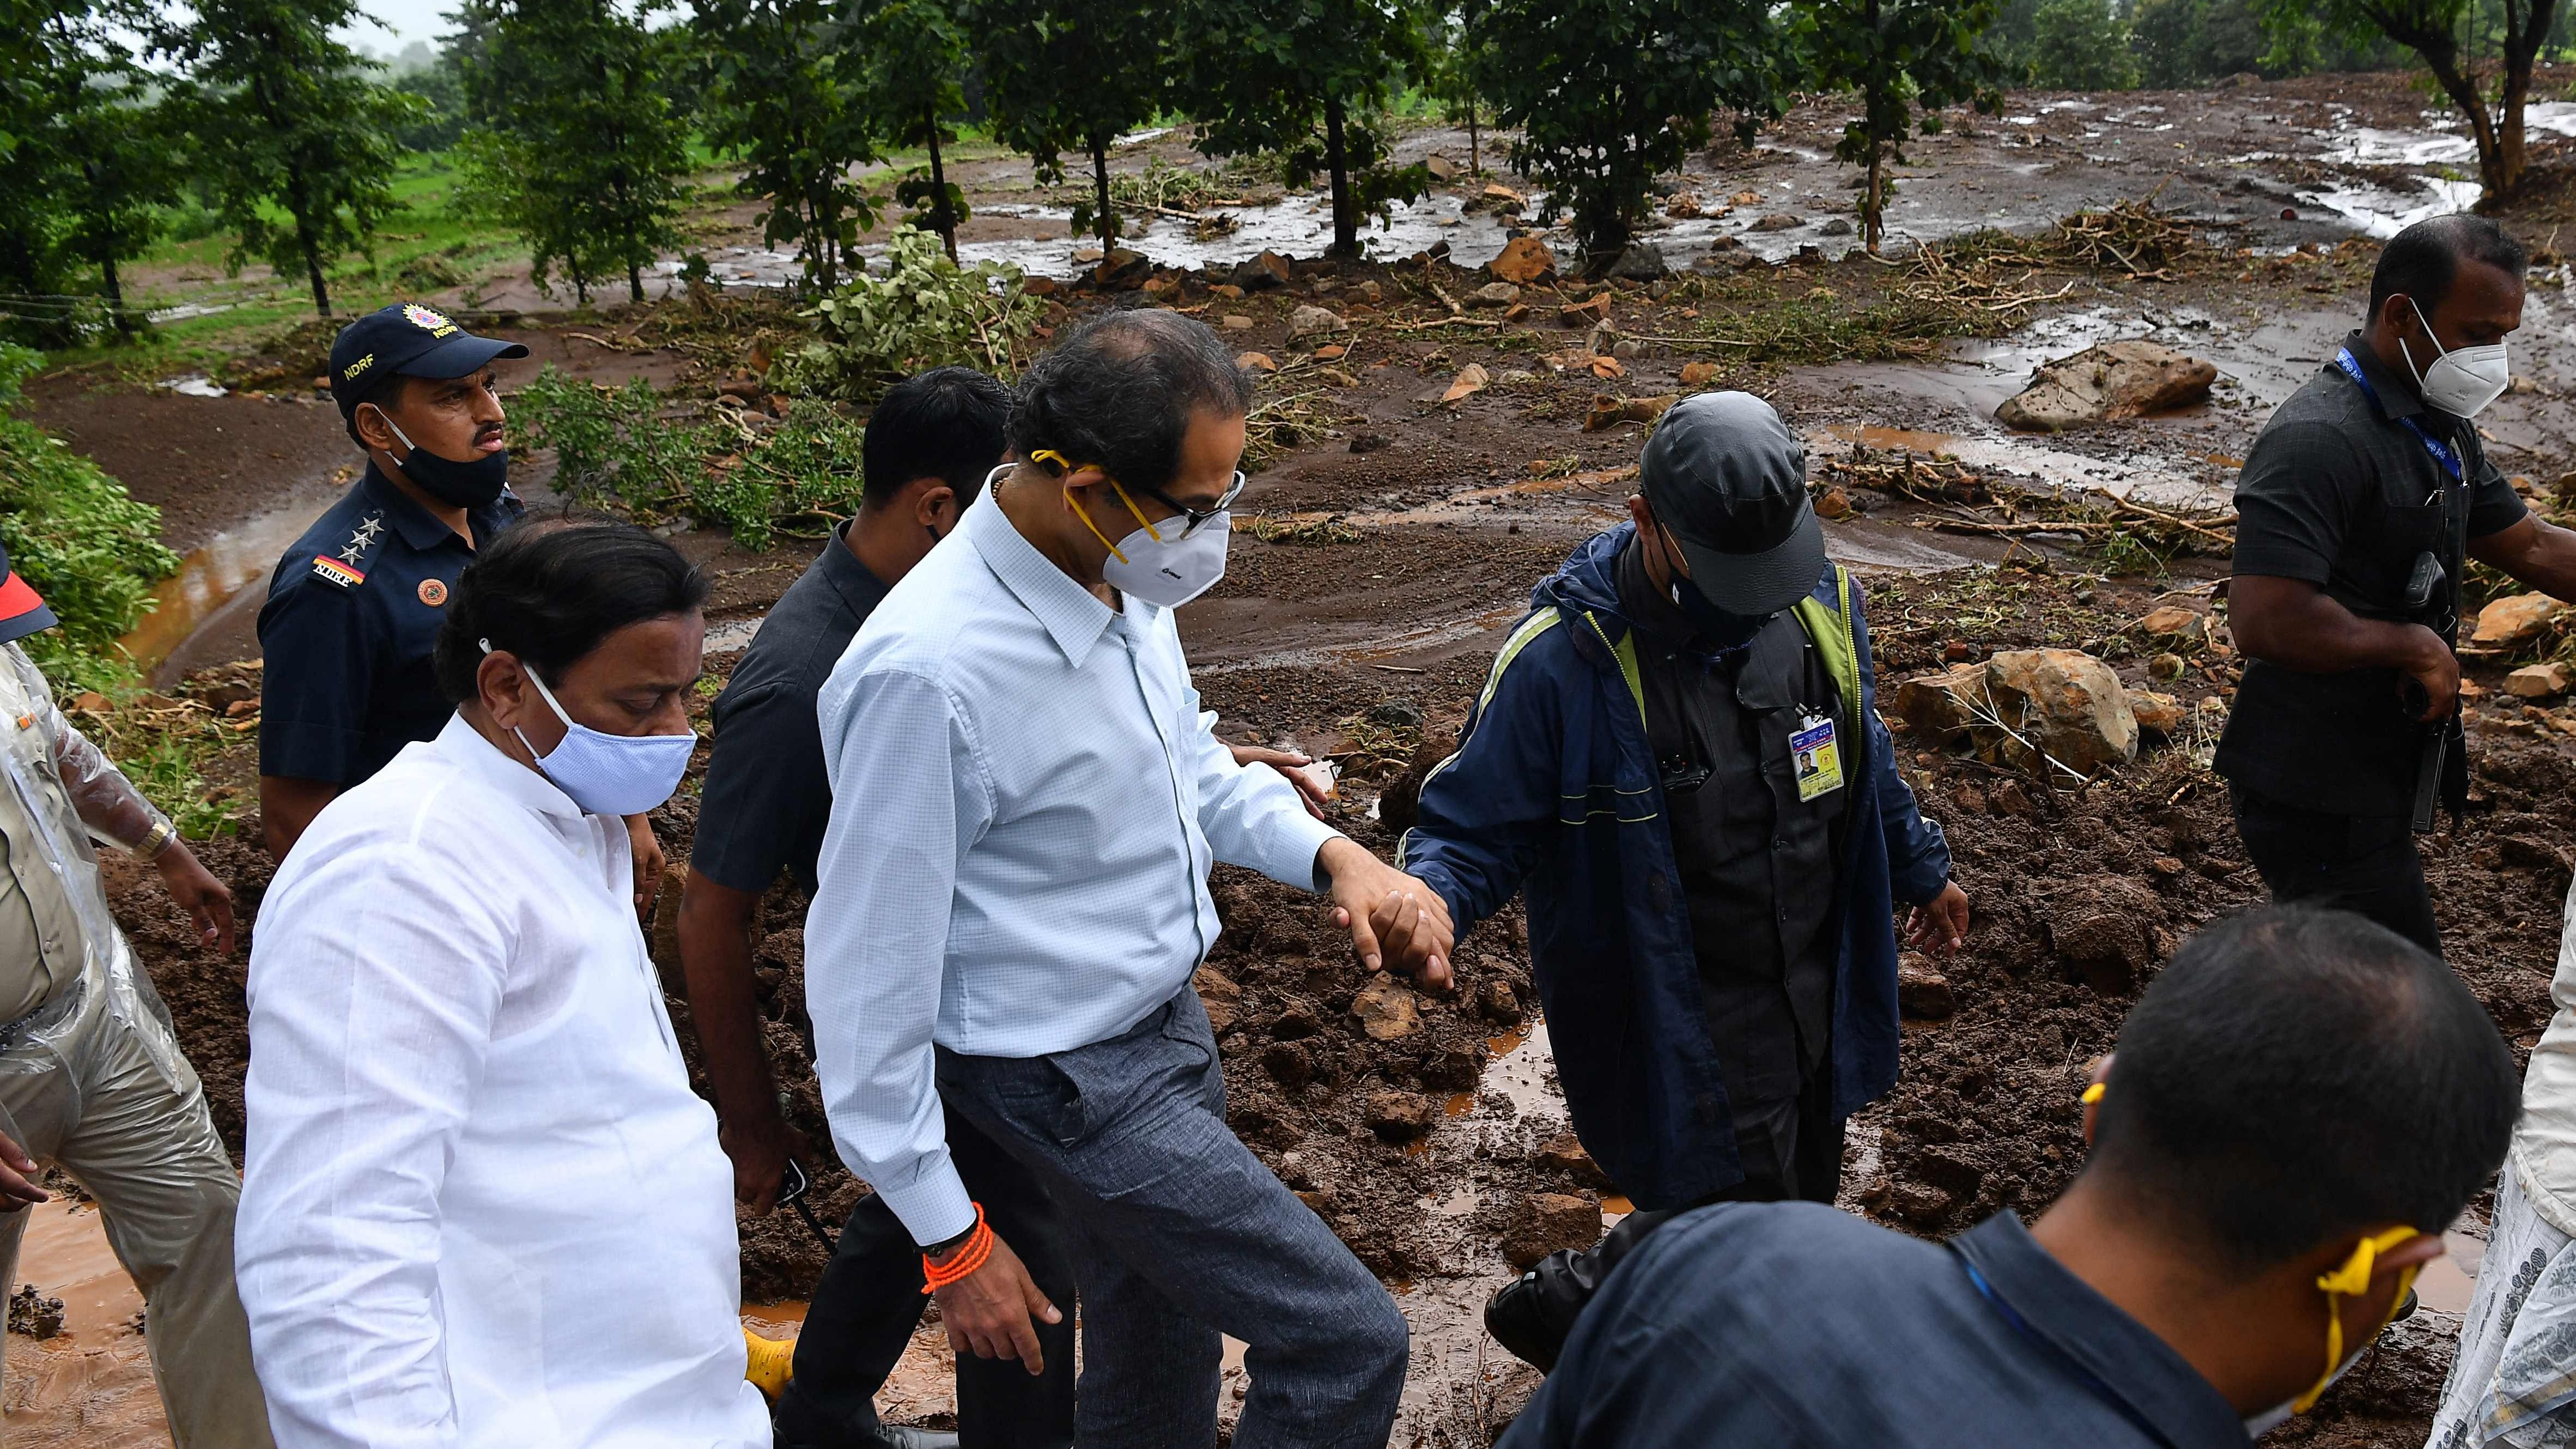 ndia's Chief Minister of Maharashtra Uddhav Thackeray (2L) visits along with officials the site of a landslide at Taliye, about 22 km from Mahad city. Credit: AFP